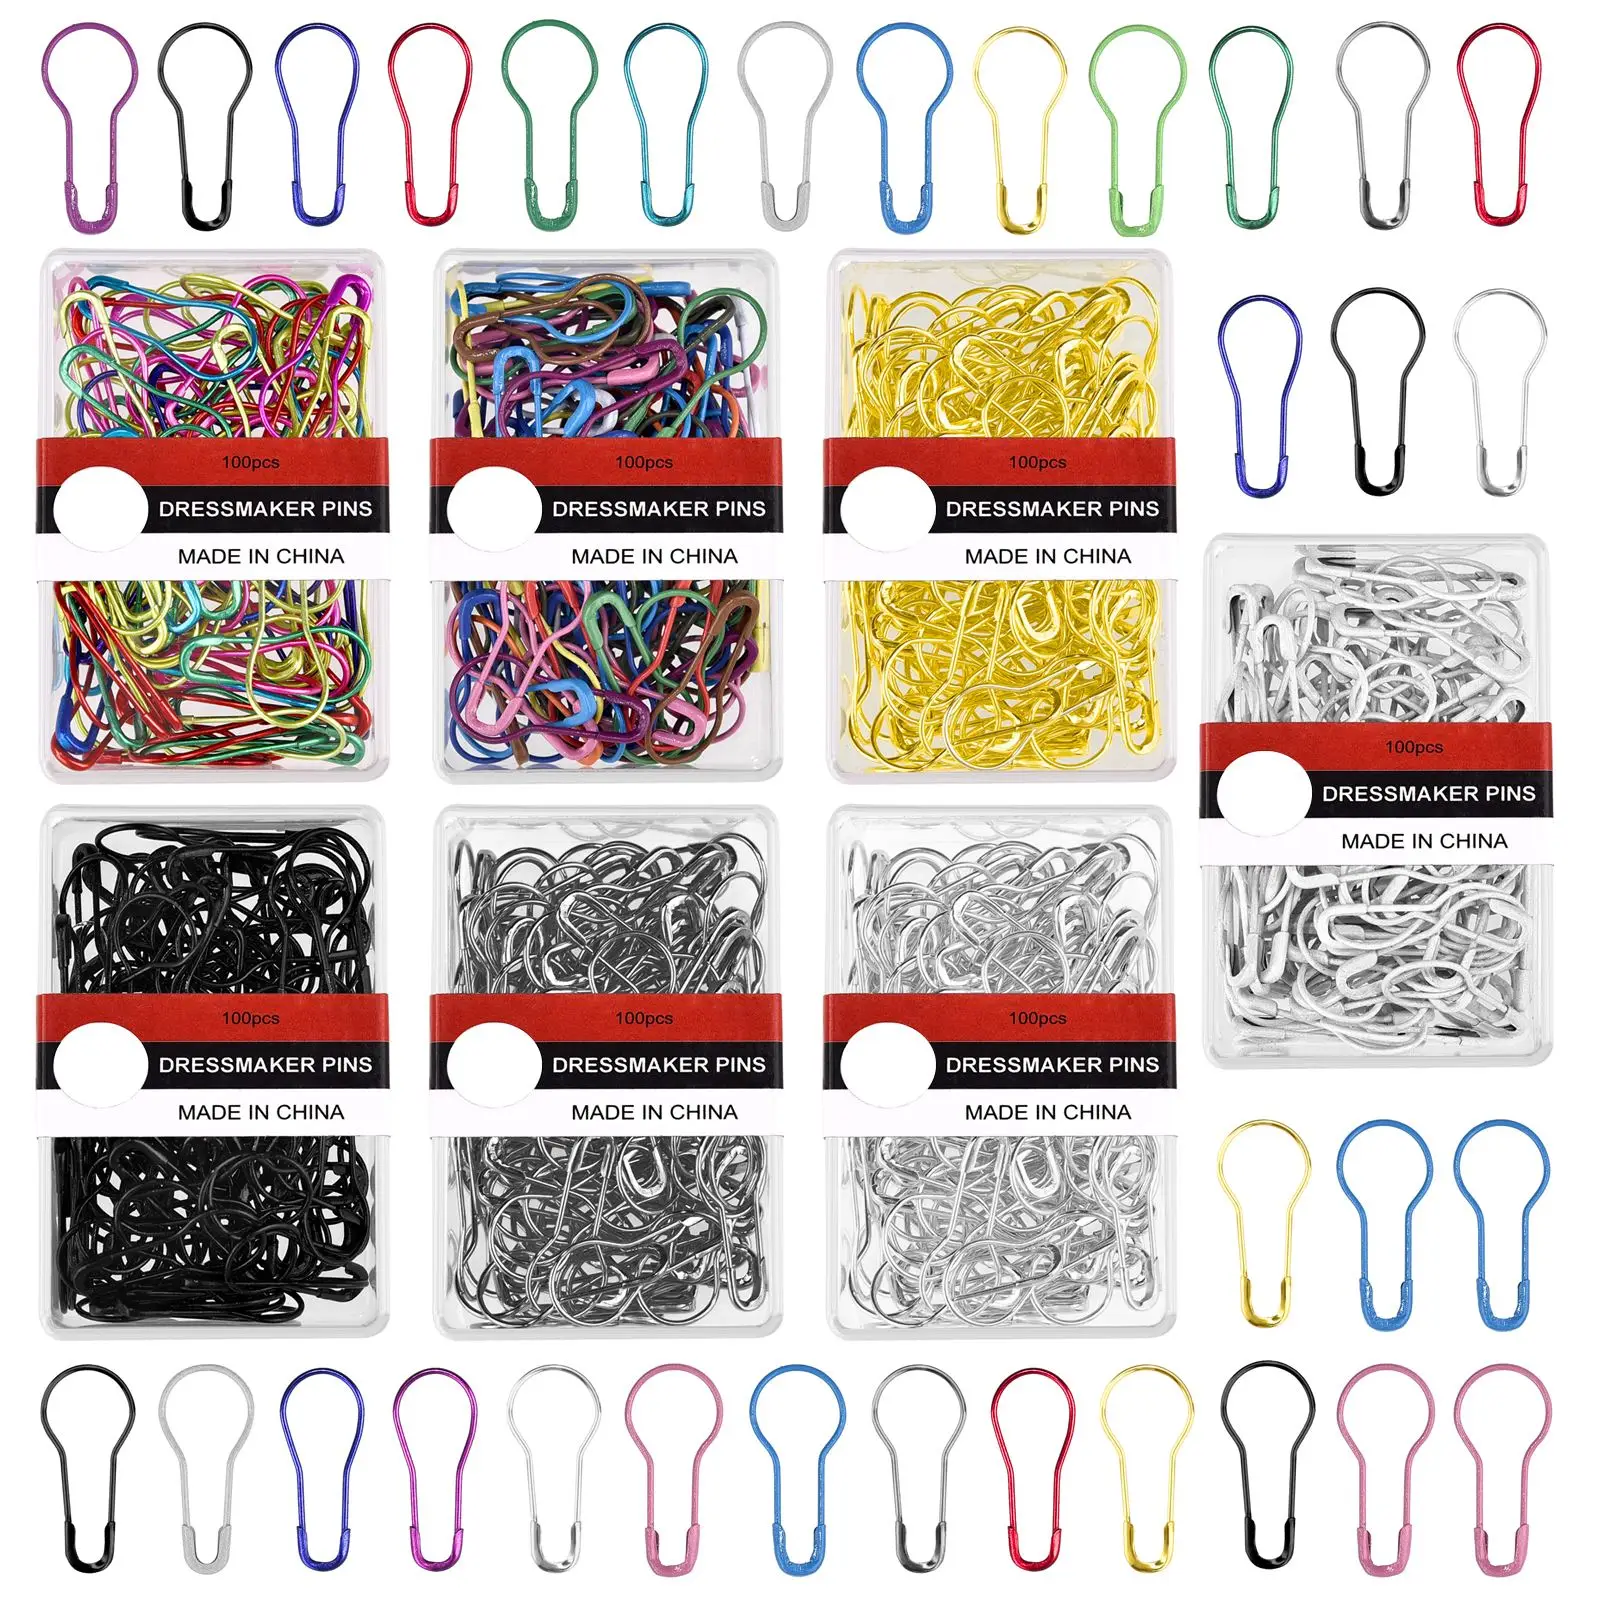 

100pcs Safety Pins Metal Gourd Clips With Box Marker Tag Pins DIY Craft Locking Knitting Cross Stitch Pins Sewing Accessories